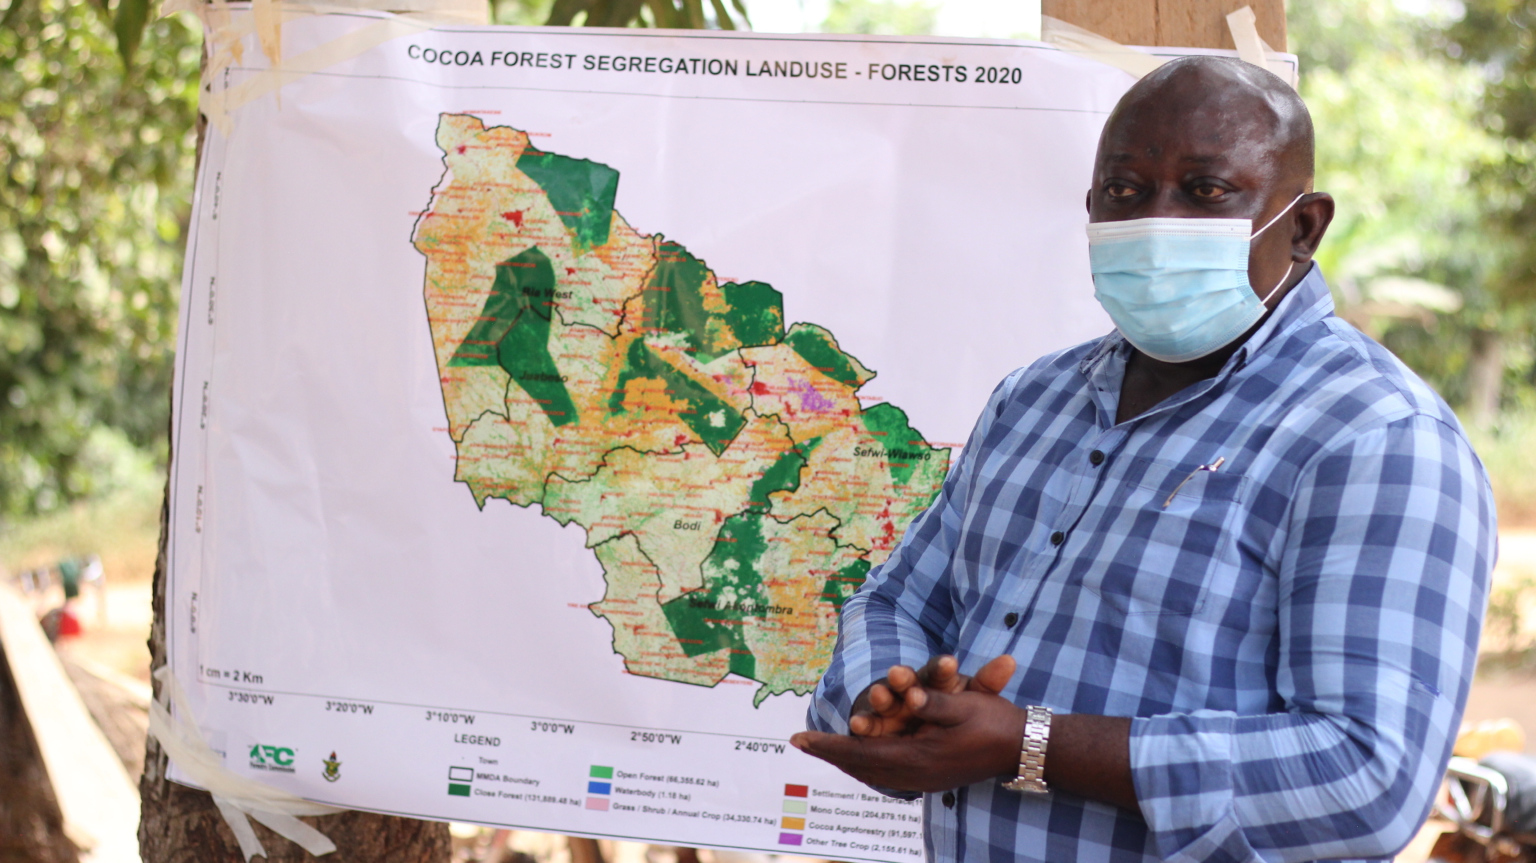 The UK Space Agency Funding the Forest 2020 Project To Save Cocoa Agriculture in Ghana